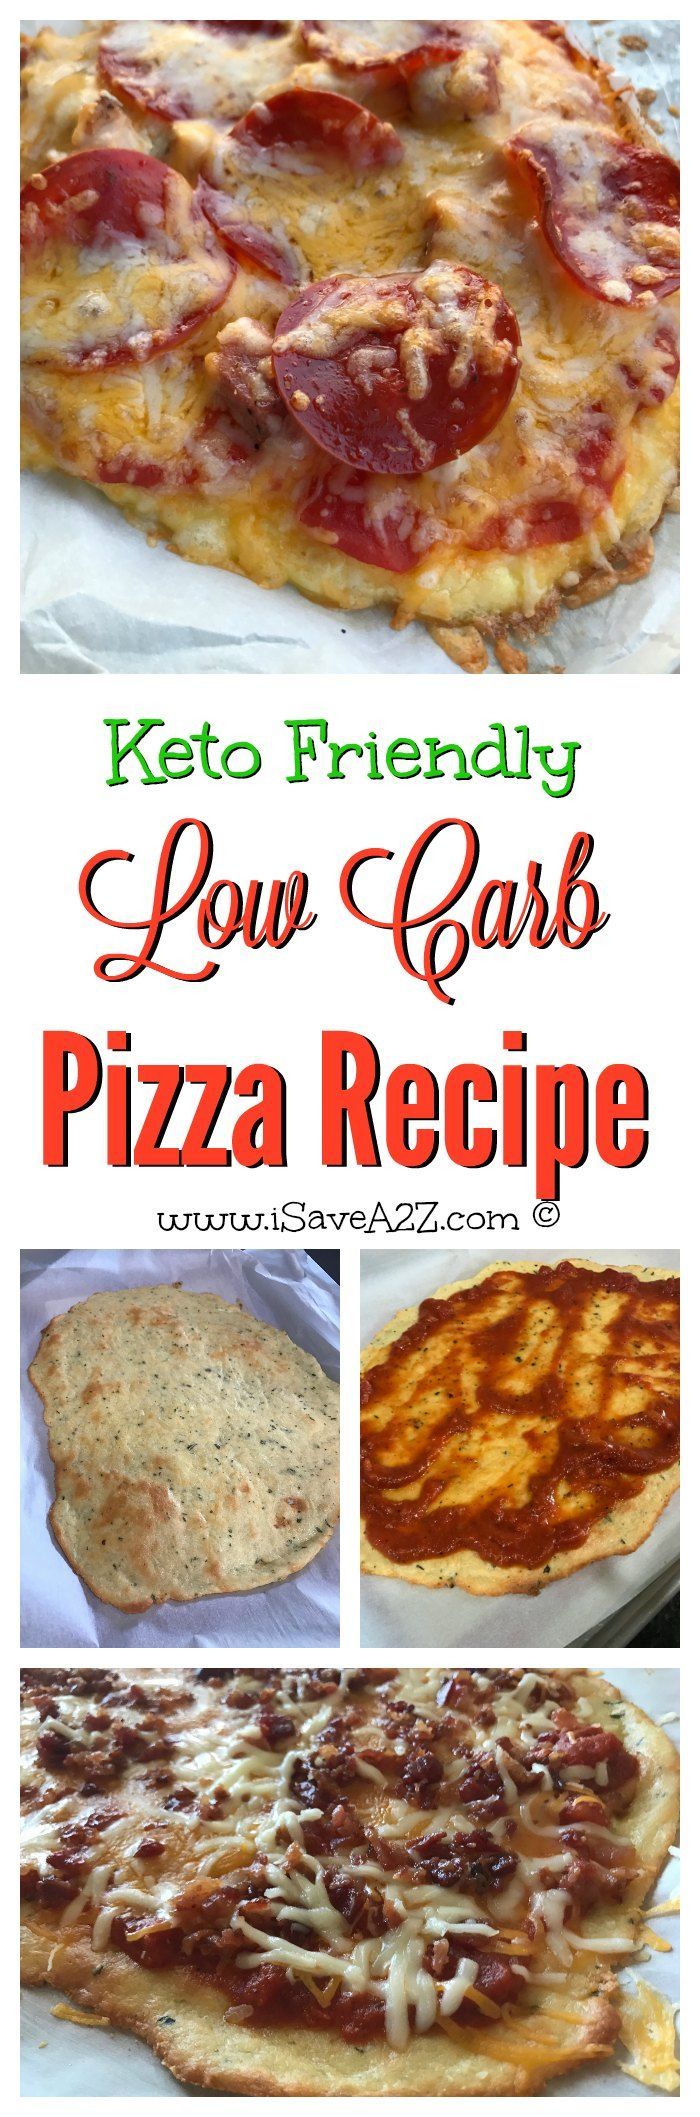 This is the BEST Low Carb Keto Friendly Pizza recipes I’ve tried!!!!   Definitely saving this recipe!